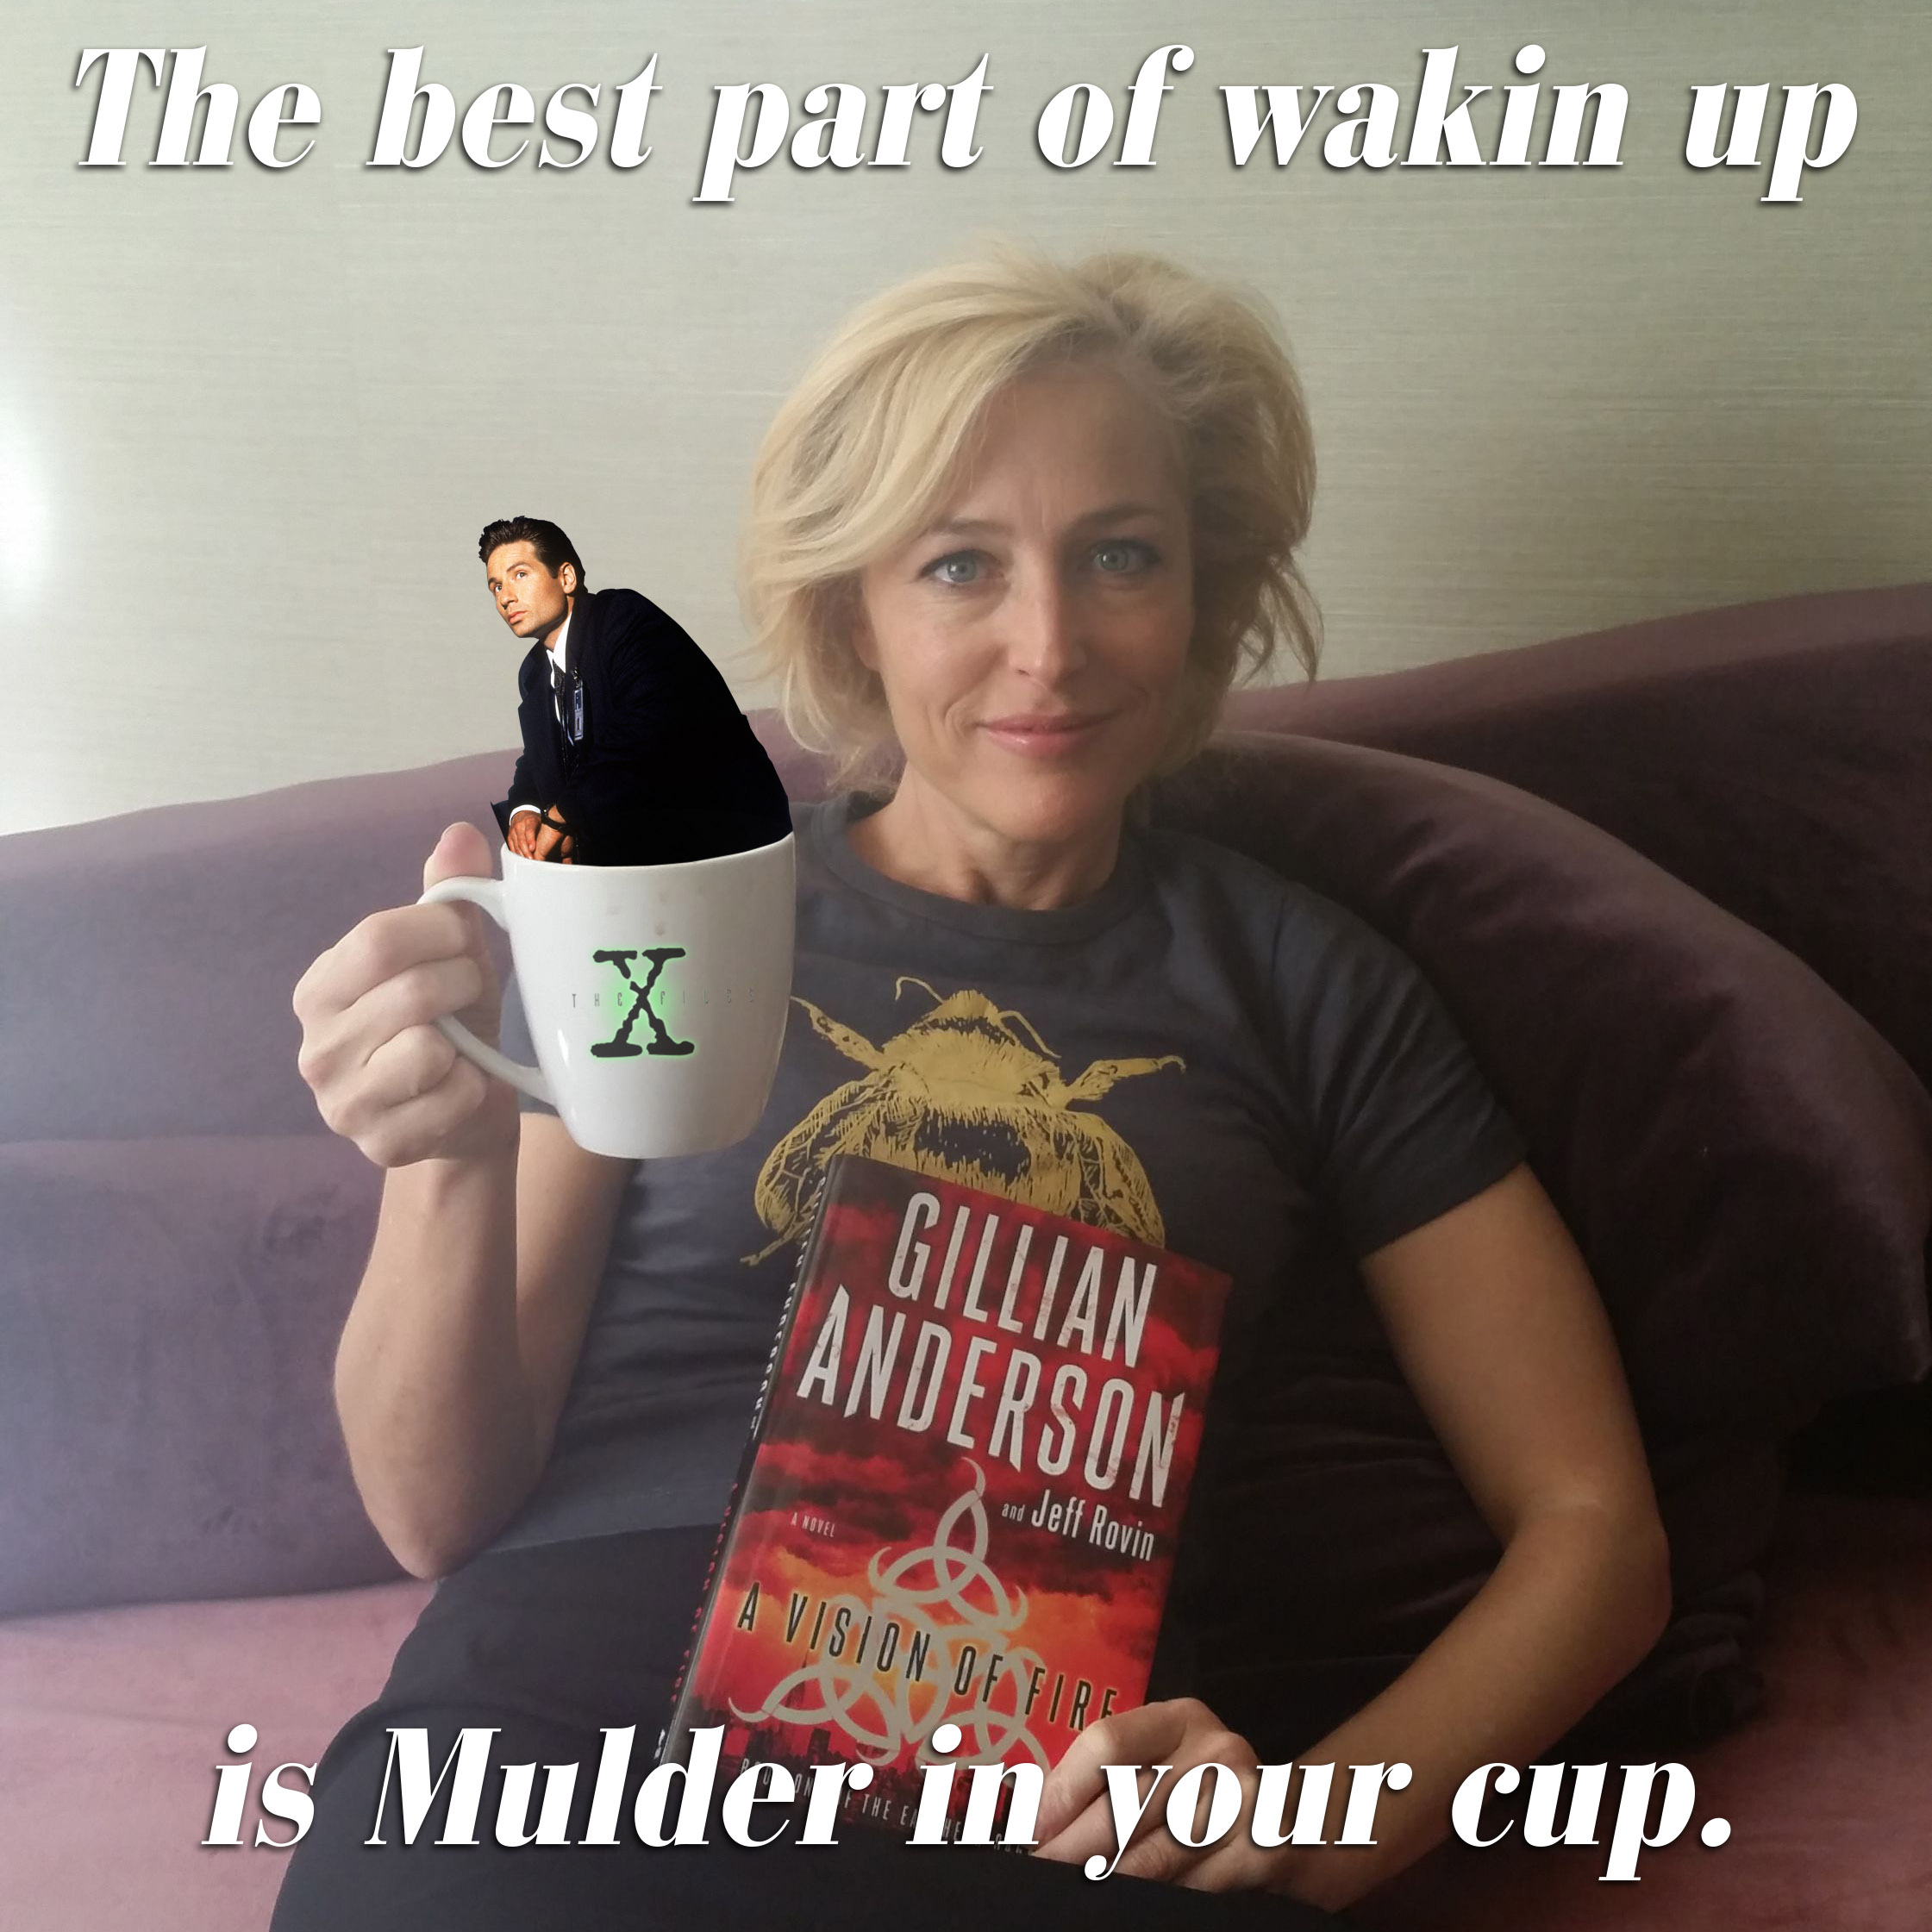 Gillian Anderson - The best part of wakin up Gillian Anderson del Baris Systen Bewer is Mulder in your cup.